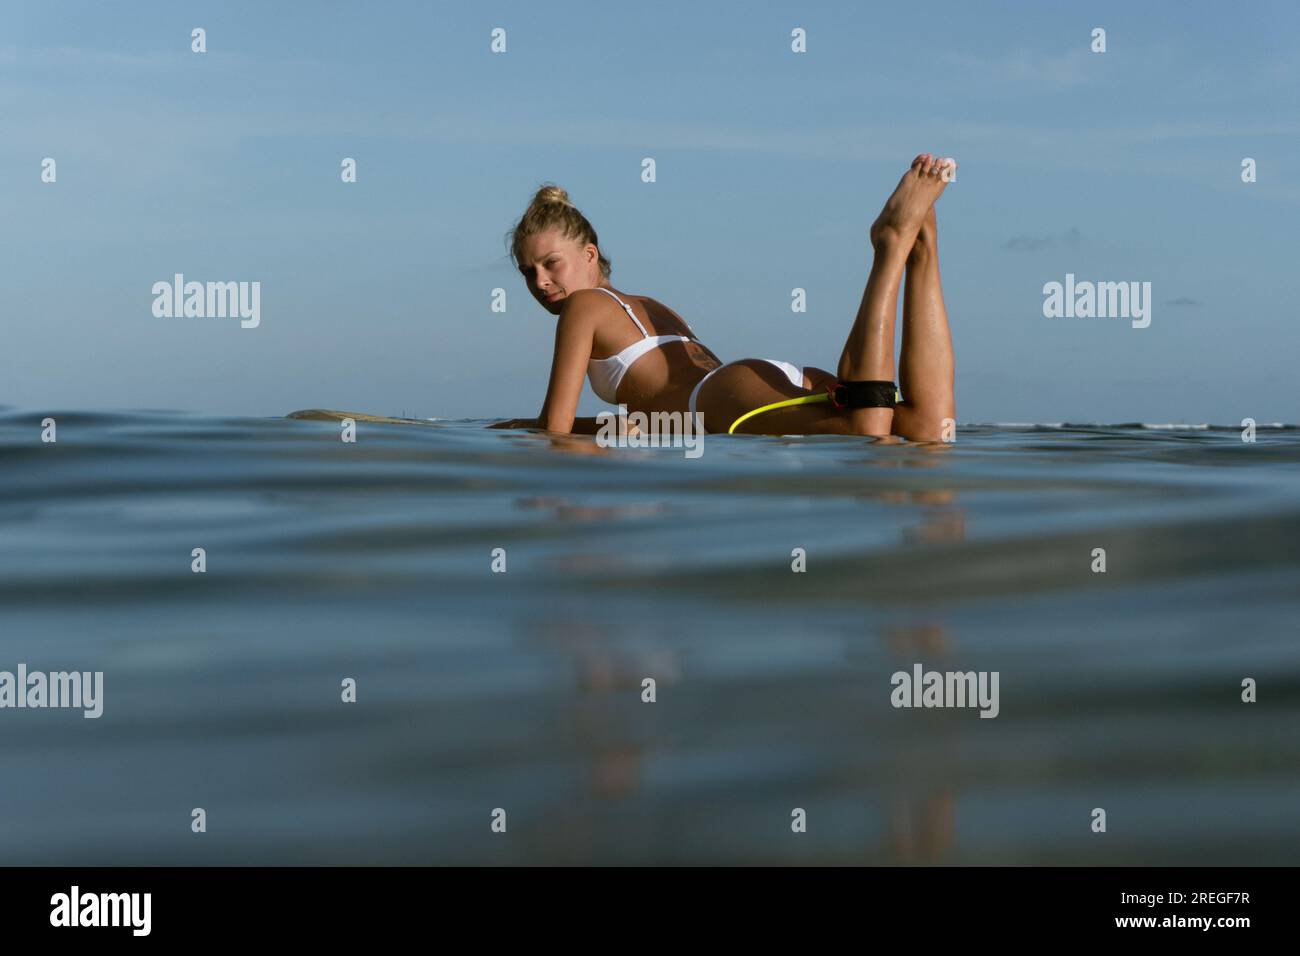 Surfer woman on a wave. Happy woman lying on surfboard Stock Photo